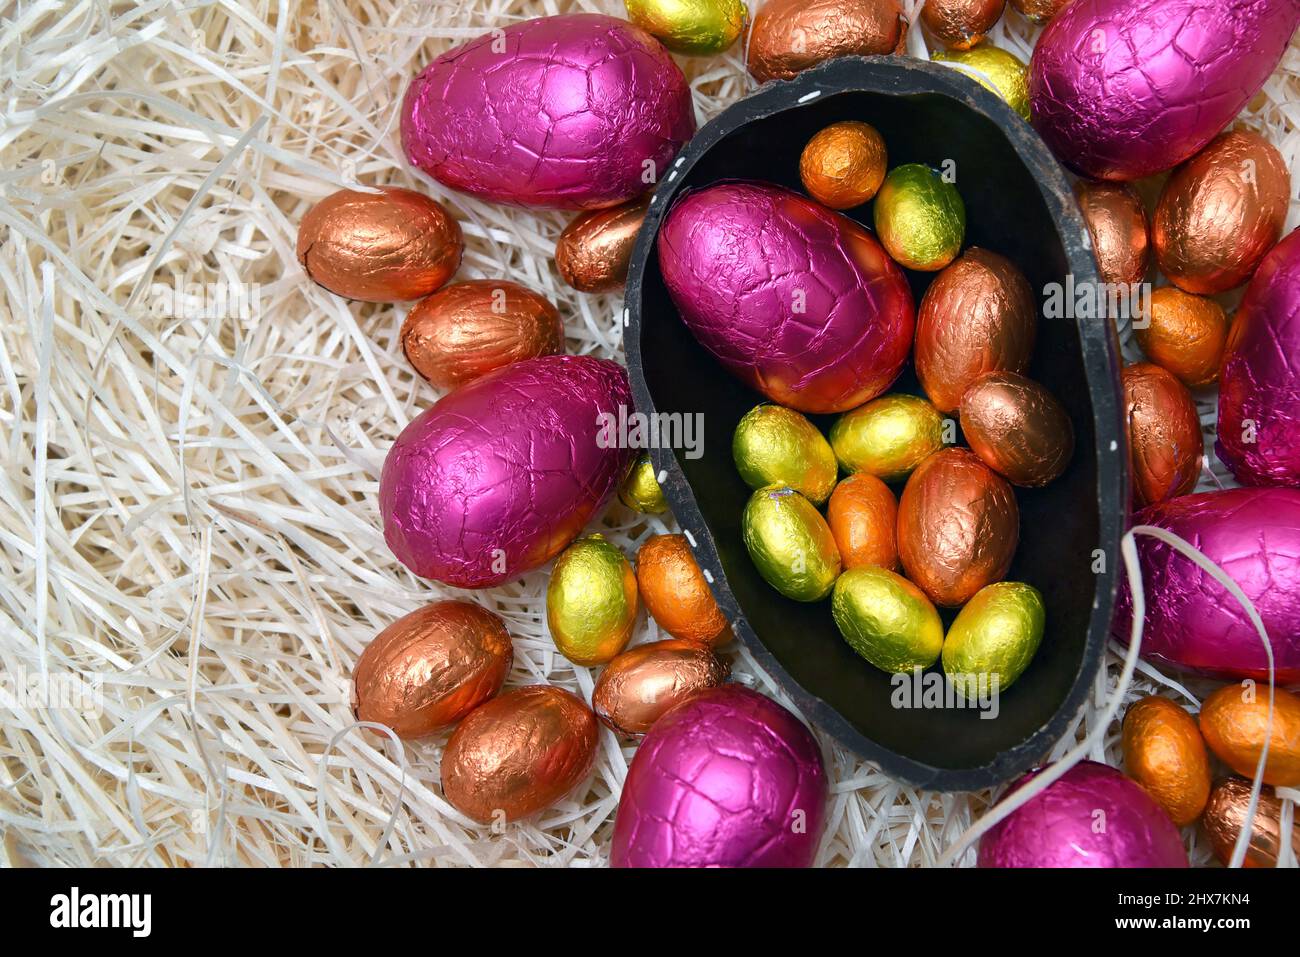 Pile of colorful foil wrapped chocolate easter eggs in pink, red, silver and gold with two halves of a large brown dark chocolate egg. Stock Photo